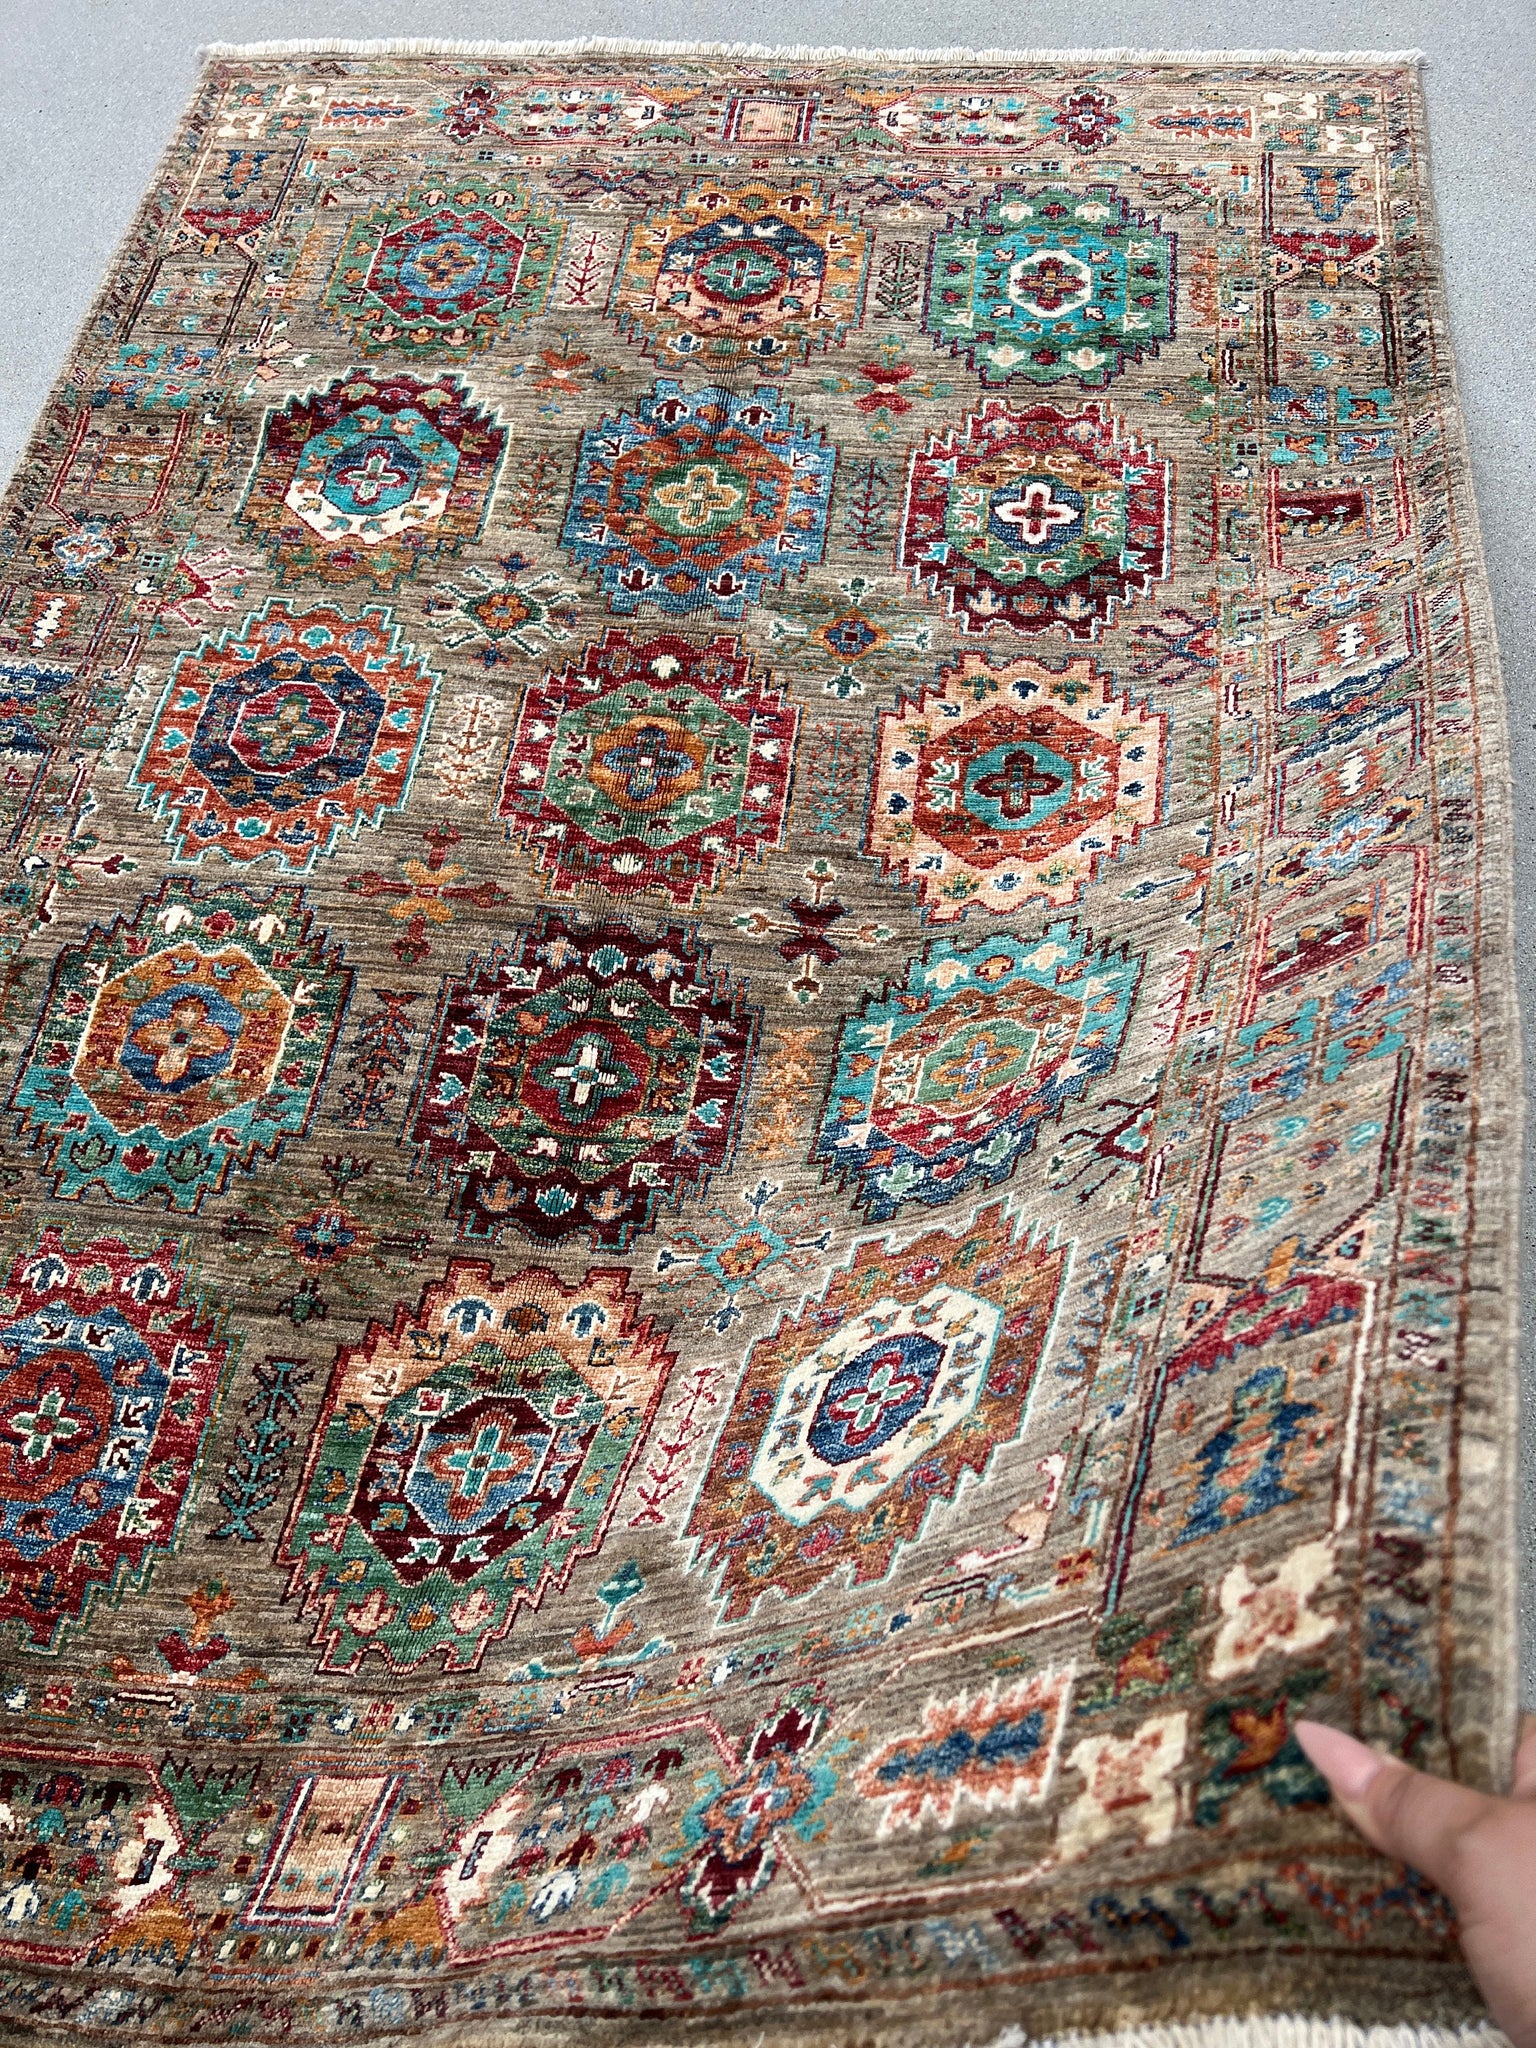 4x6 Handmade Afghan Rug | Grey Brown Teal Turquoise Blue Green Red Caramel Gold Ivory Cream | Wool Boho Persian Turkish Oushak Hand Knotted